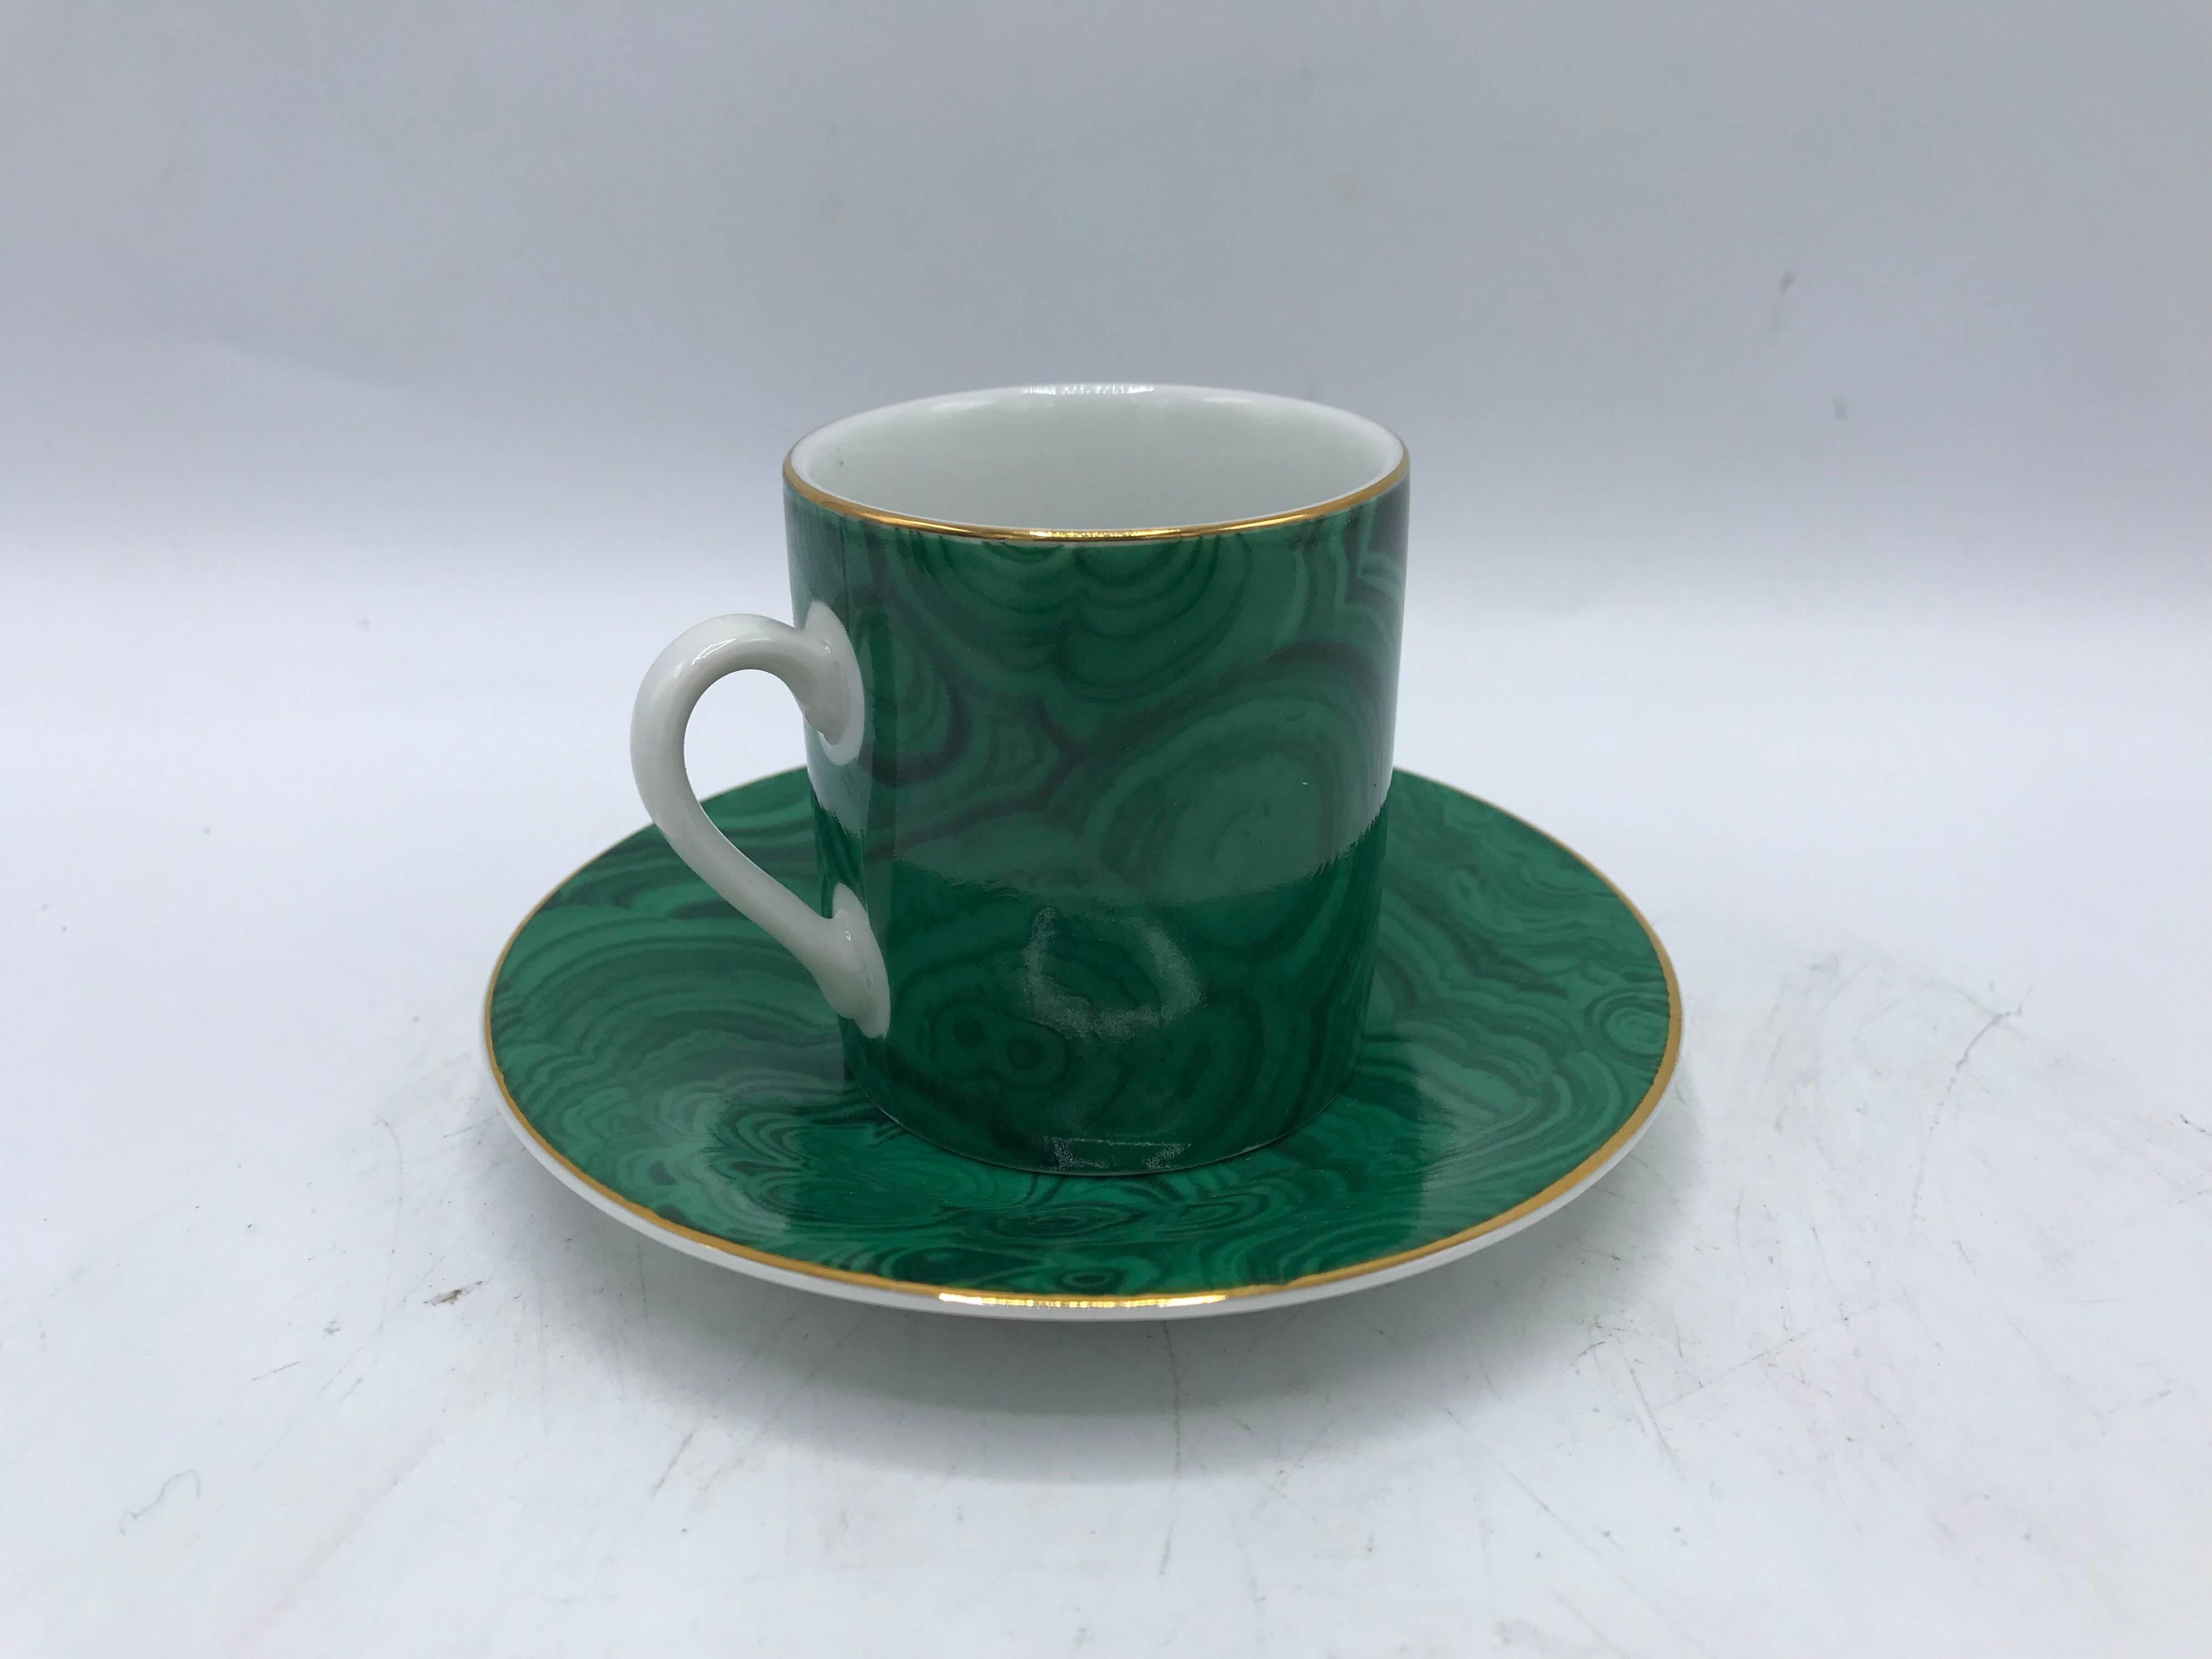 20th Century 1980s Neiman Marcus Malachite Porcelain Teacups and Saucers, Set of Eight